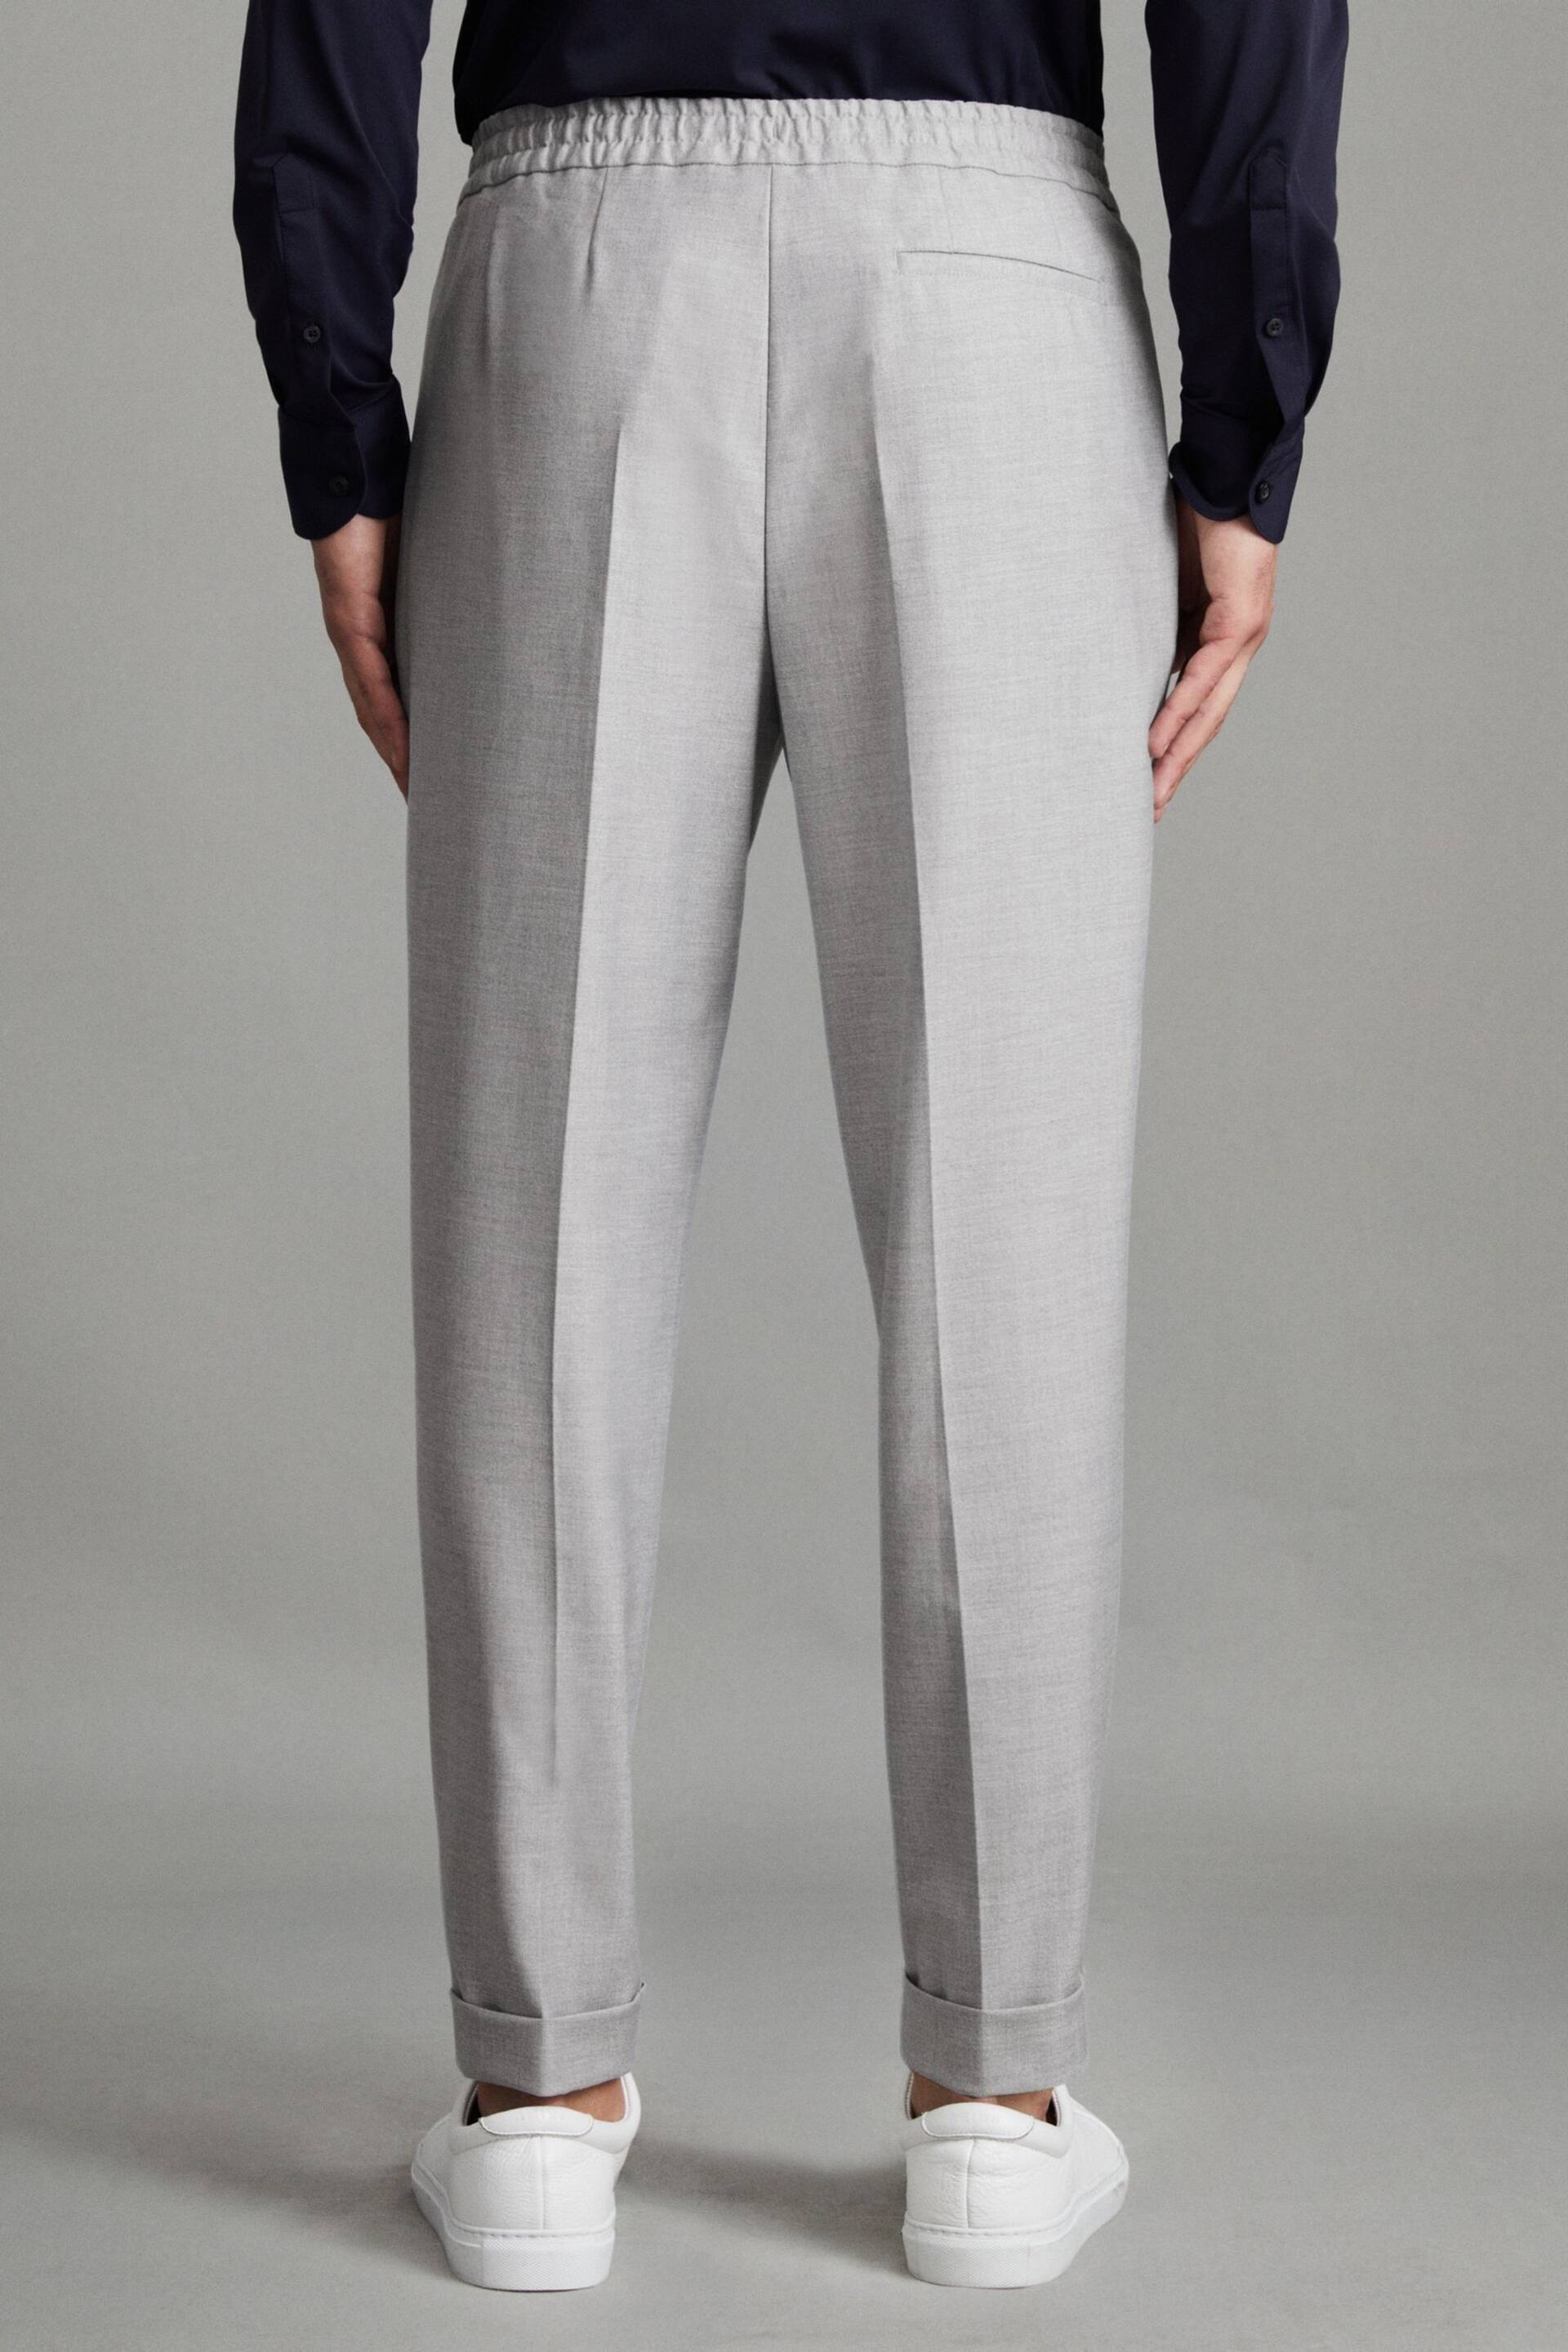 Reiss Grey Brighton Relaxed Drawstring Trousers with Turn-Ups - Image 4 of 6